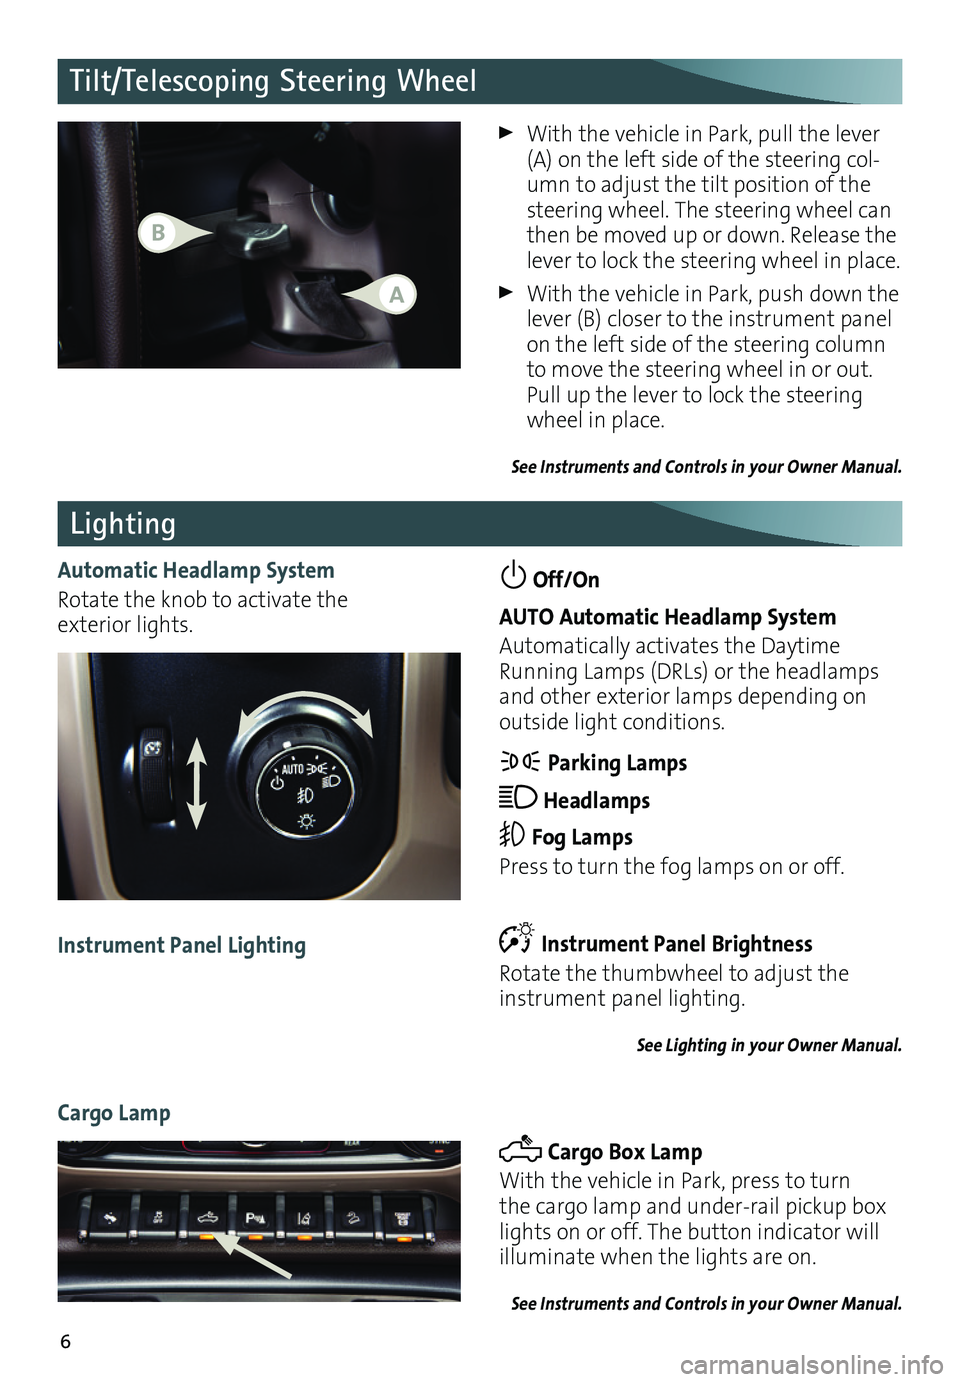 GMC SIERRA 2016  Get To Know Guide 6
Lighting
Automatic Headlamp System
Rotate the knob to activate the  exterior lights.
 Off/On 
AUTO Automatic Headlamp System
Automatically activates the Daytime Running Lamps (DRLs) or the headlamps